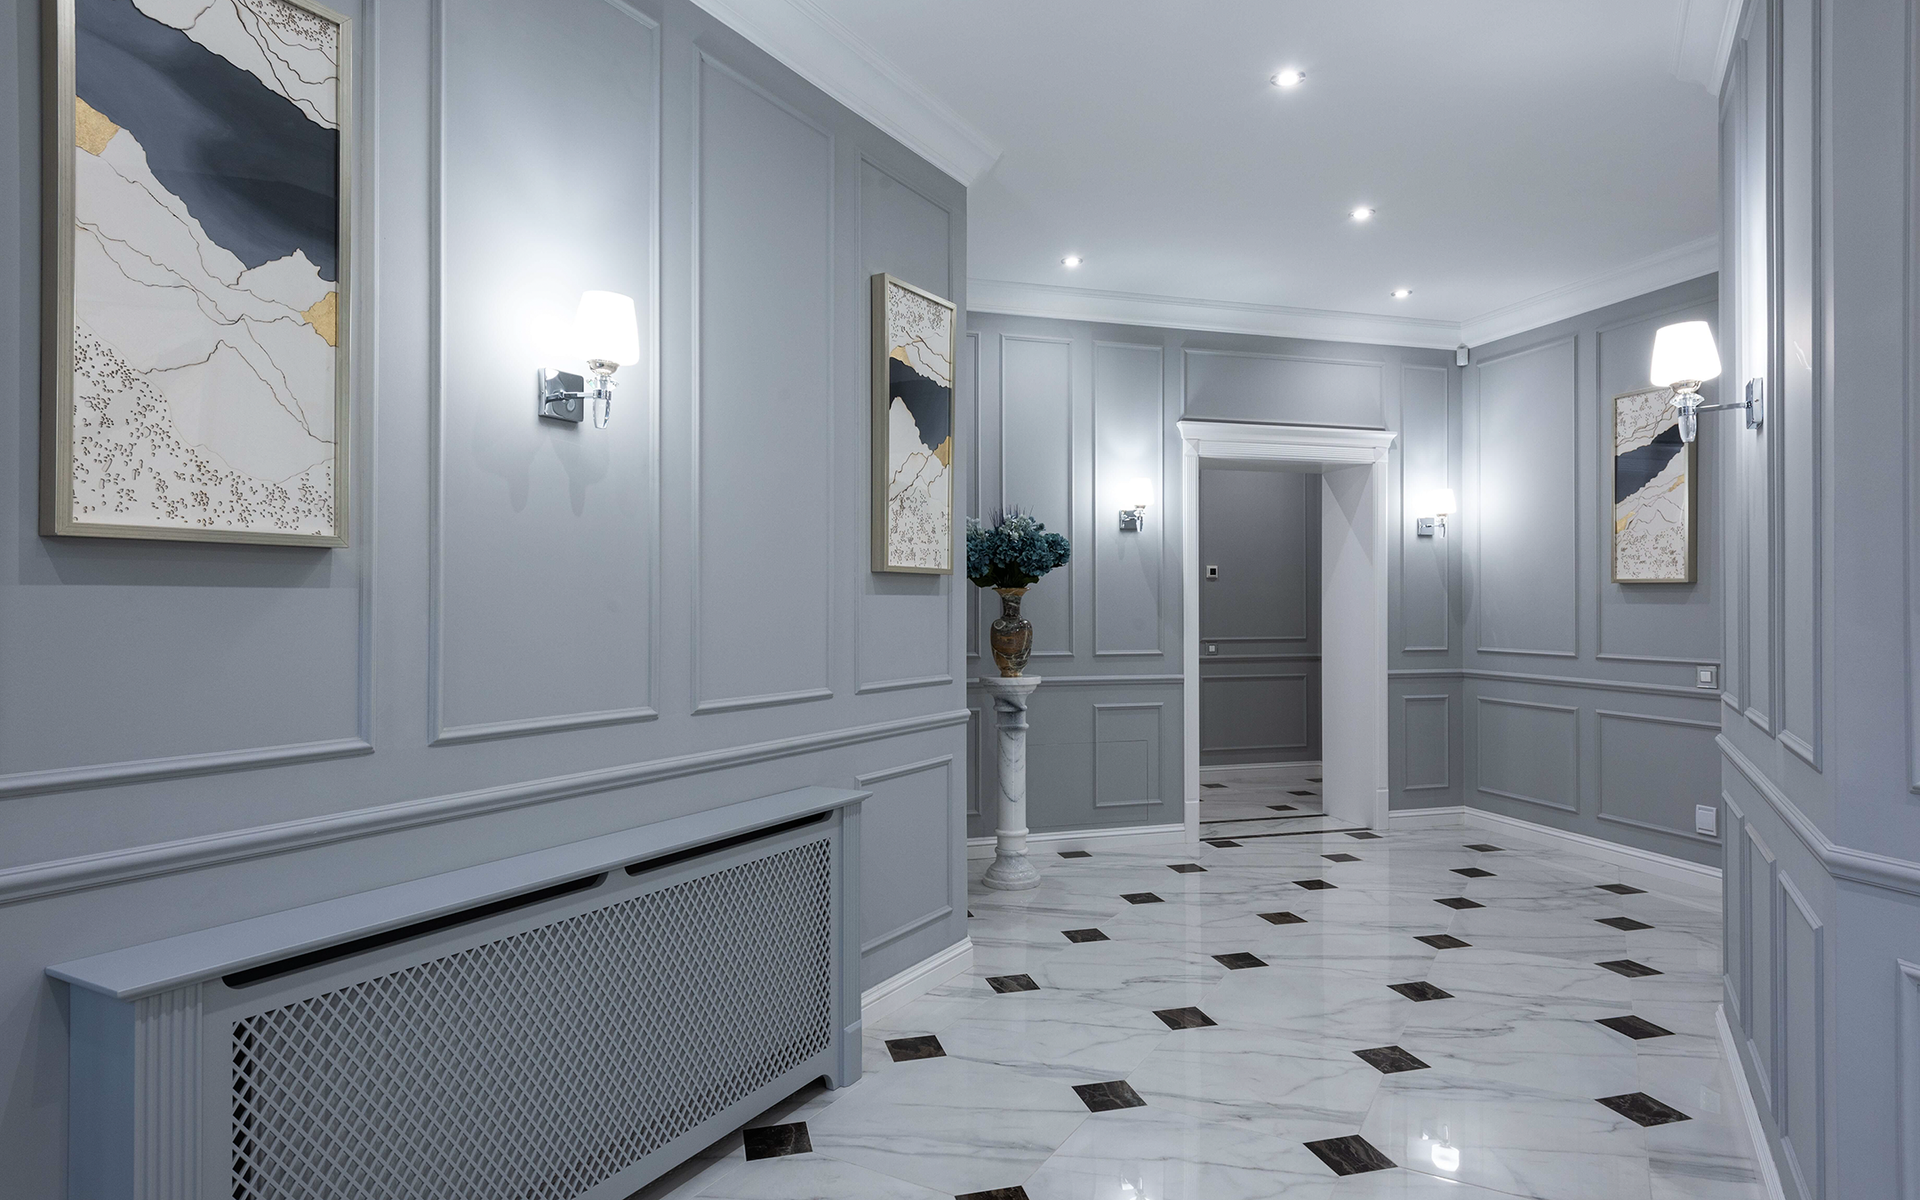 Beautifully painted hallway in gray with white trim with a marble checkered floor.